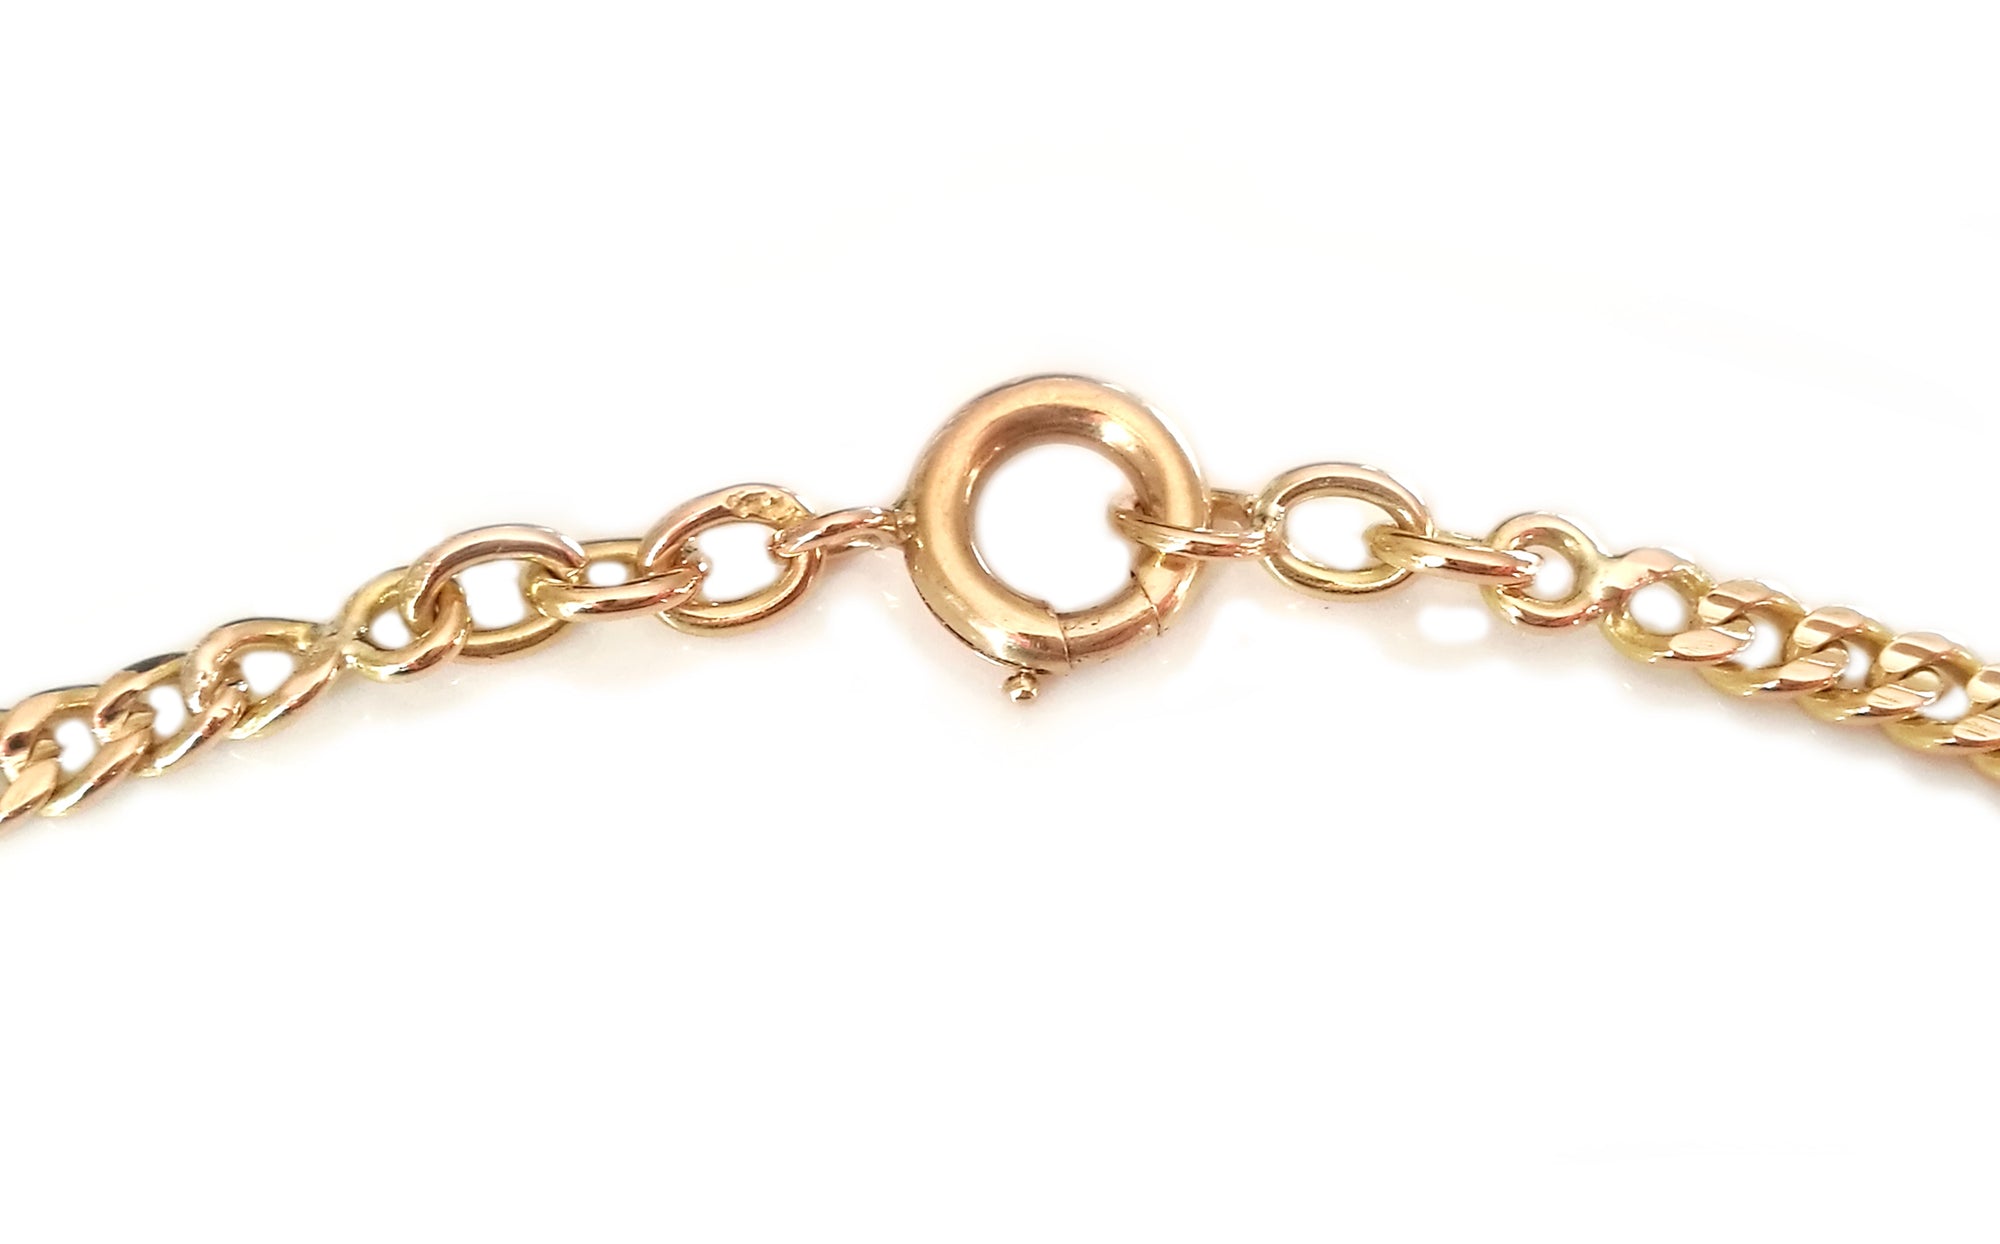 French Antique Victorian 18k Yellow Gold 4mm Flat Curb Link Chain Necklace